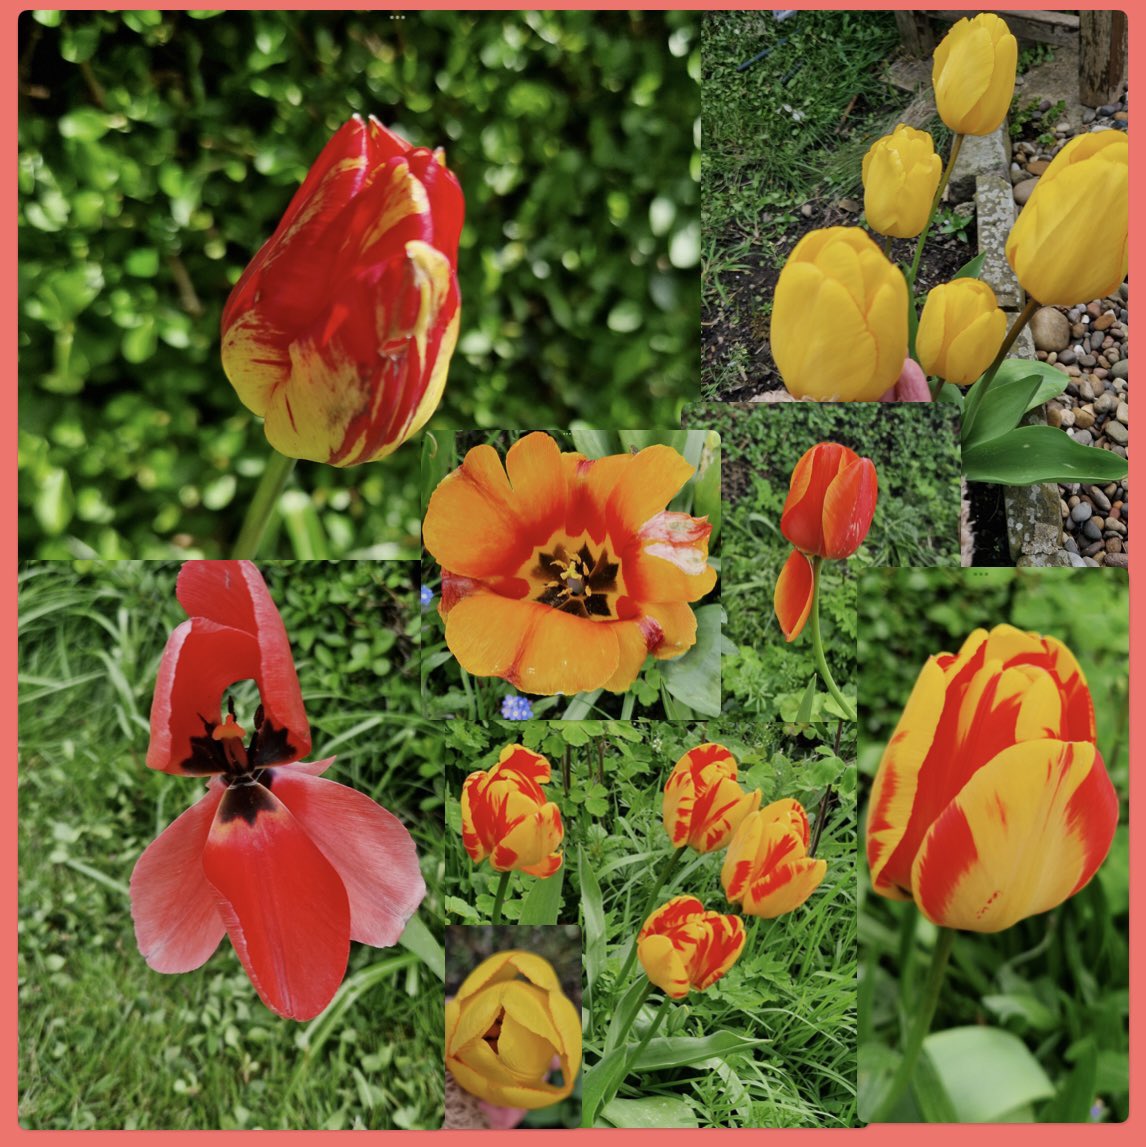 #GoodAfternoon #TwitterFriends the sun is out and it’s pleasant but very chilly. Anyway,.. Happy #TulipTuesday #TuesdayMotivaton